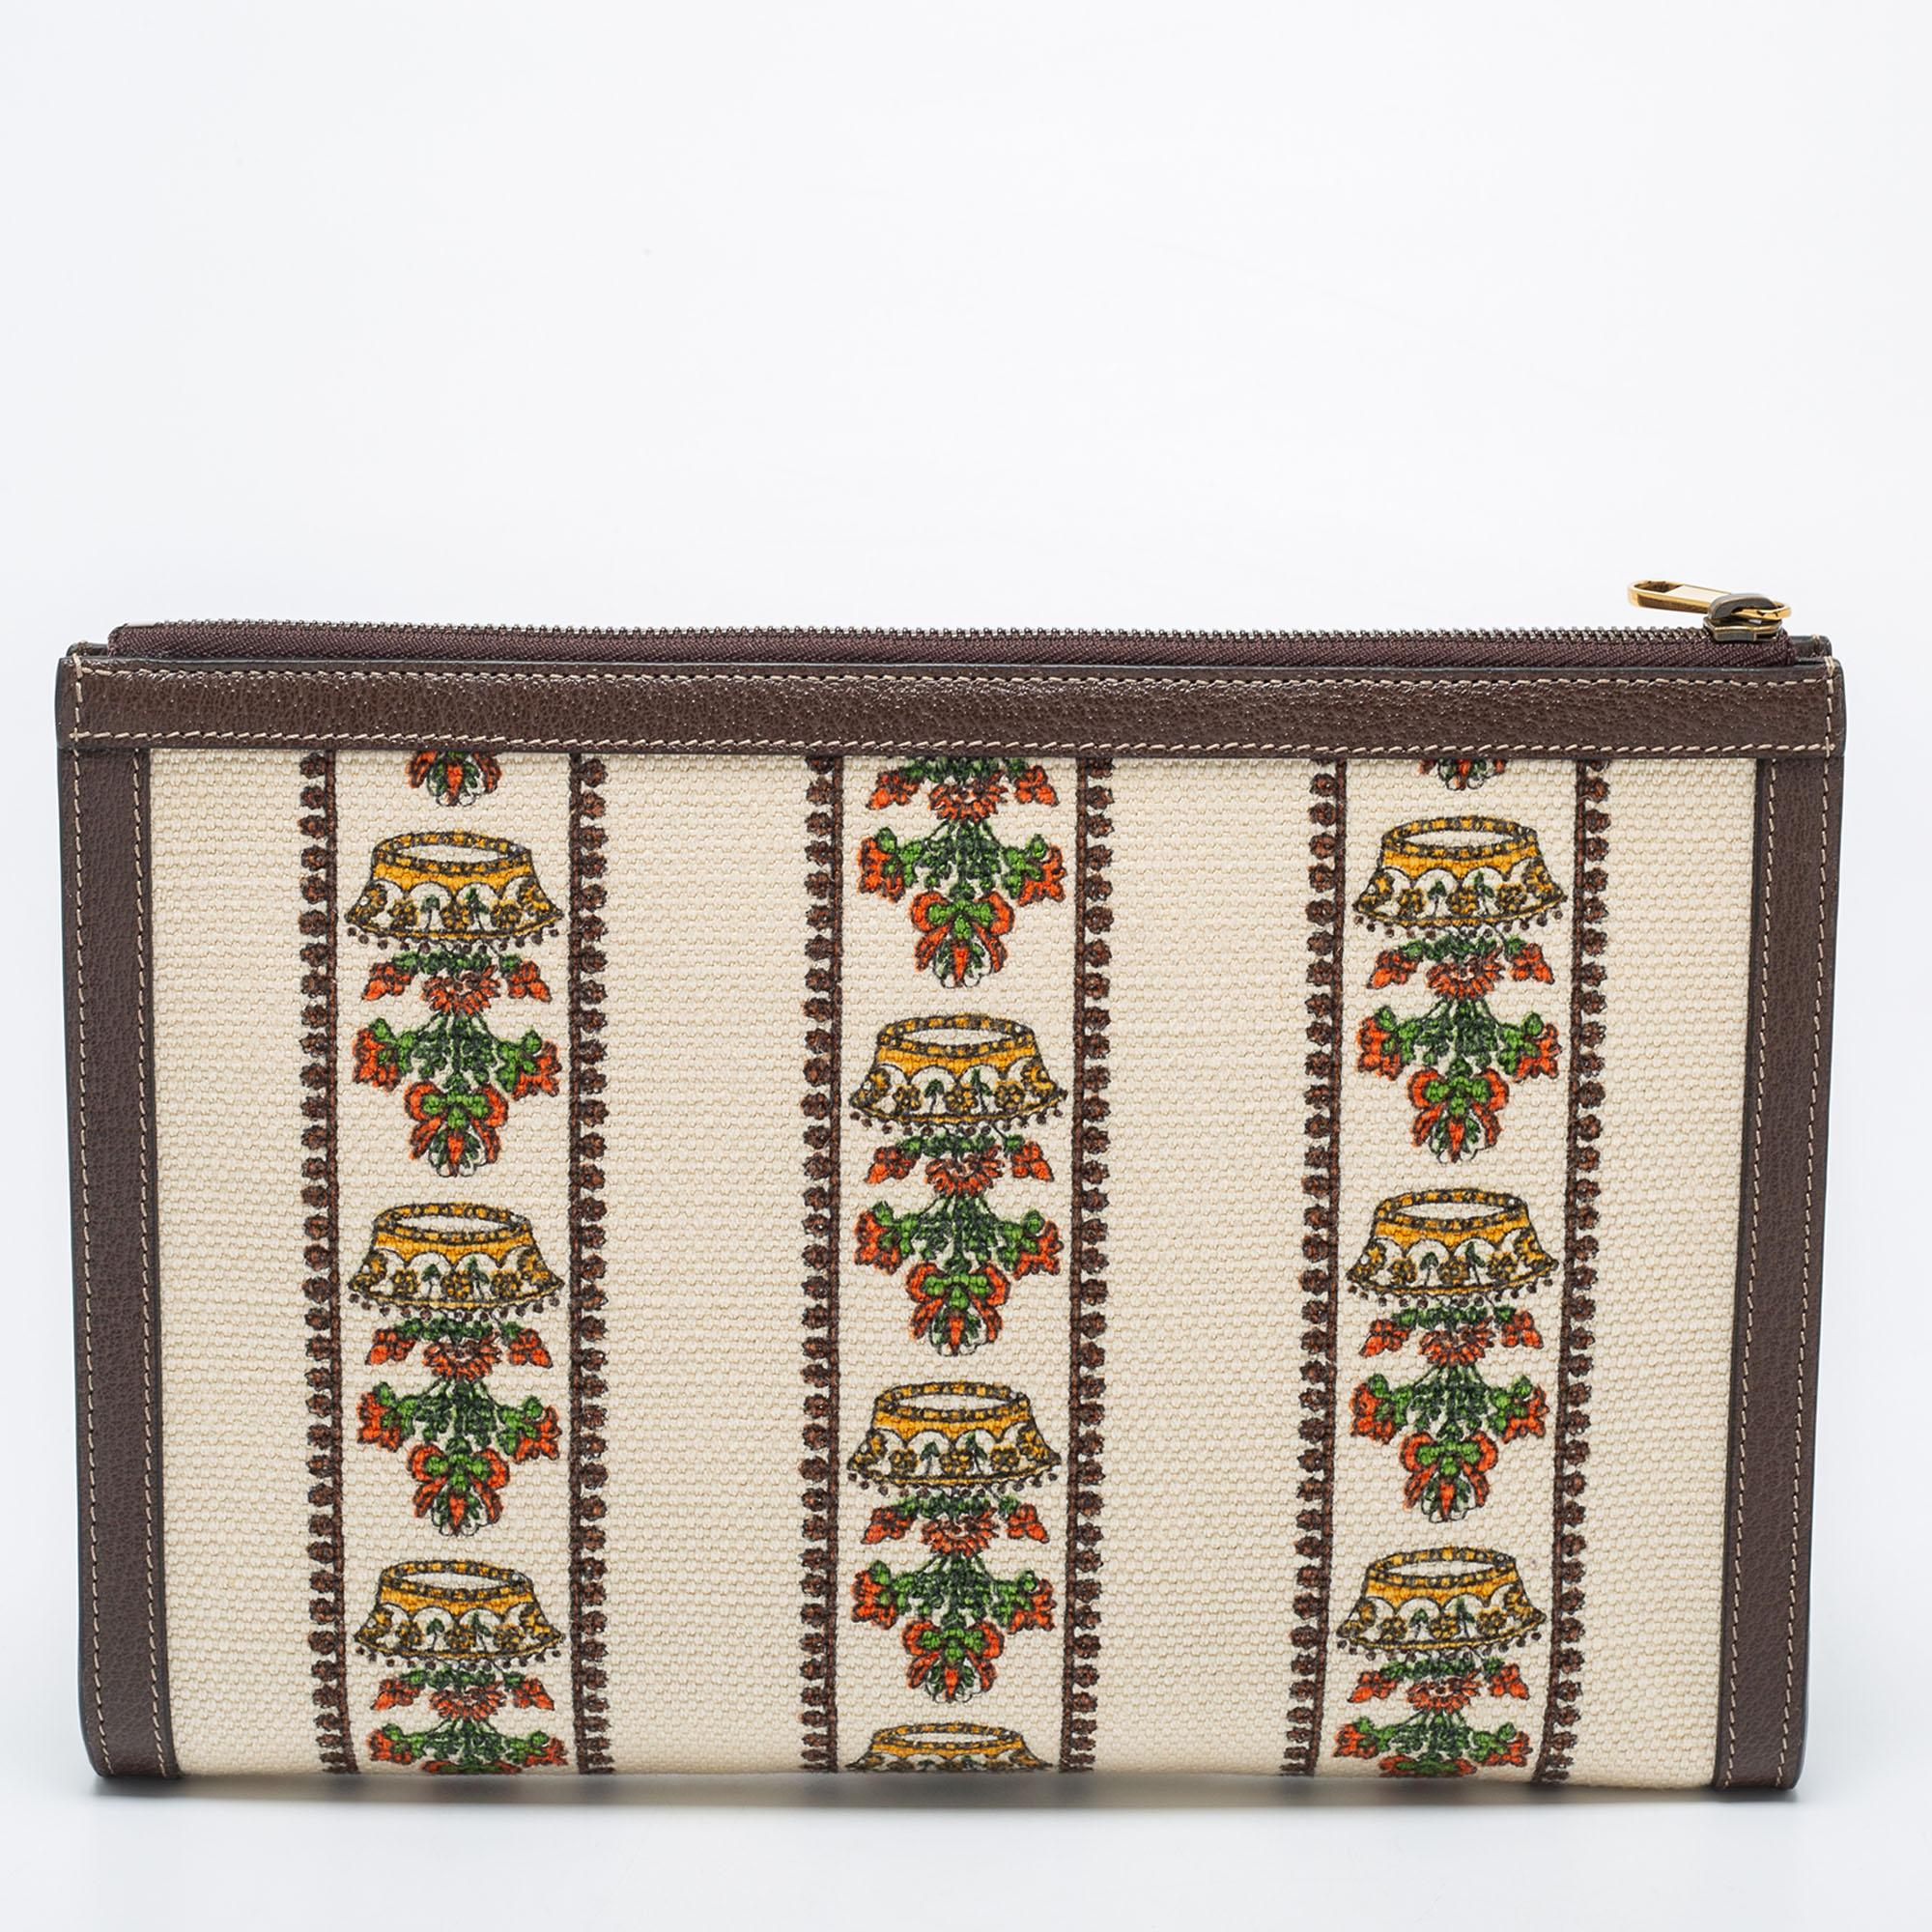 From storing your travel toiletries to cosmetics, this 'Music is Mine' pouch from Gucci deems super helpful. The cream-brown canvas and leather exterior give away luxurious feels, while the gold-toned hardware adds a polished touch. The top zipper